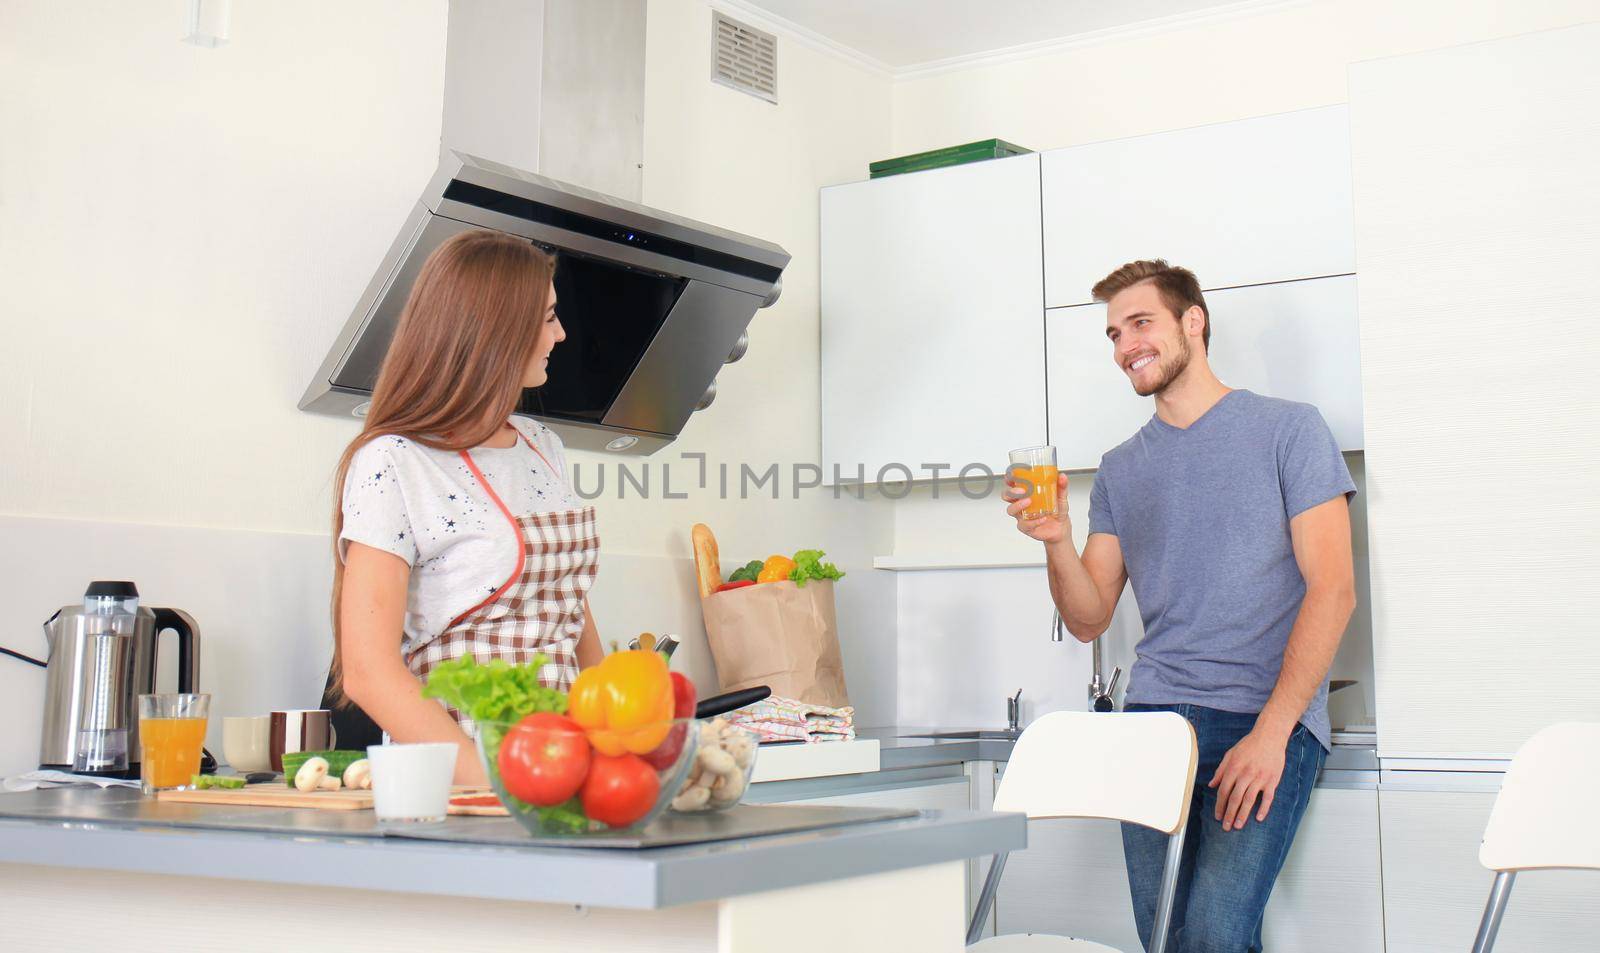 Beautiful young couple in pajamas is looking at each other and smiling while cooking in kitchen at home.